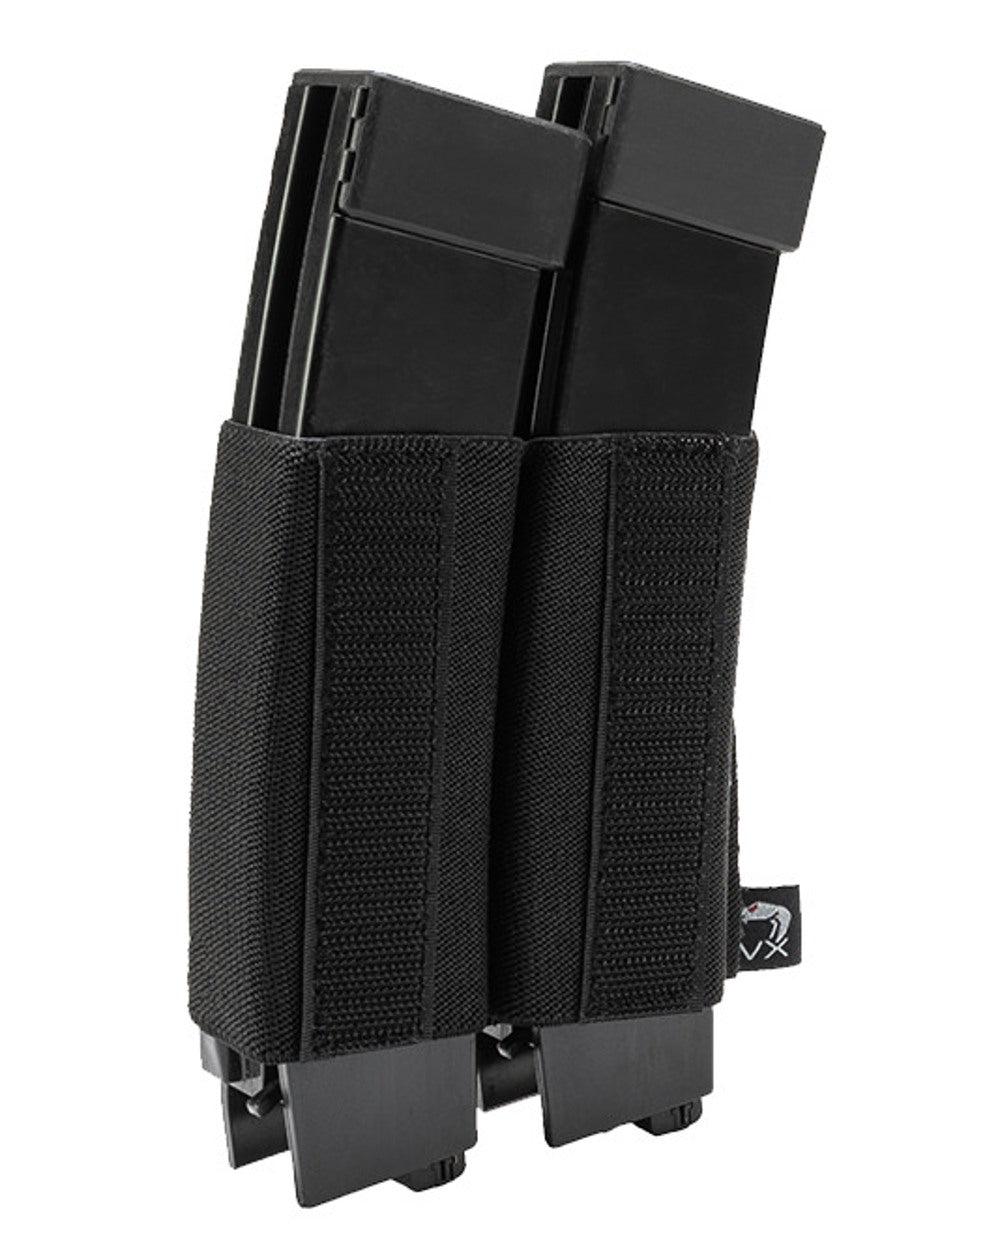 Viper VX Double SMG Mag Sleeve in Black 